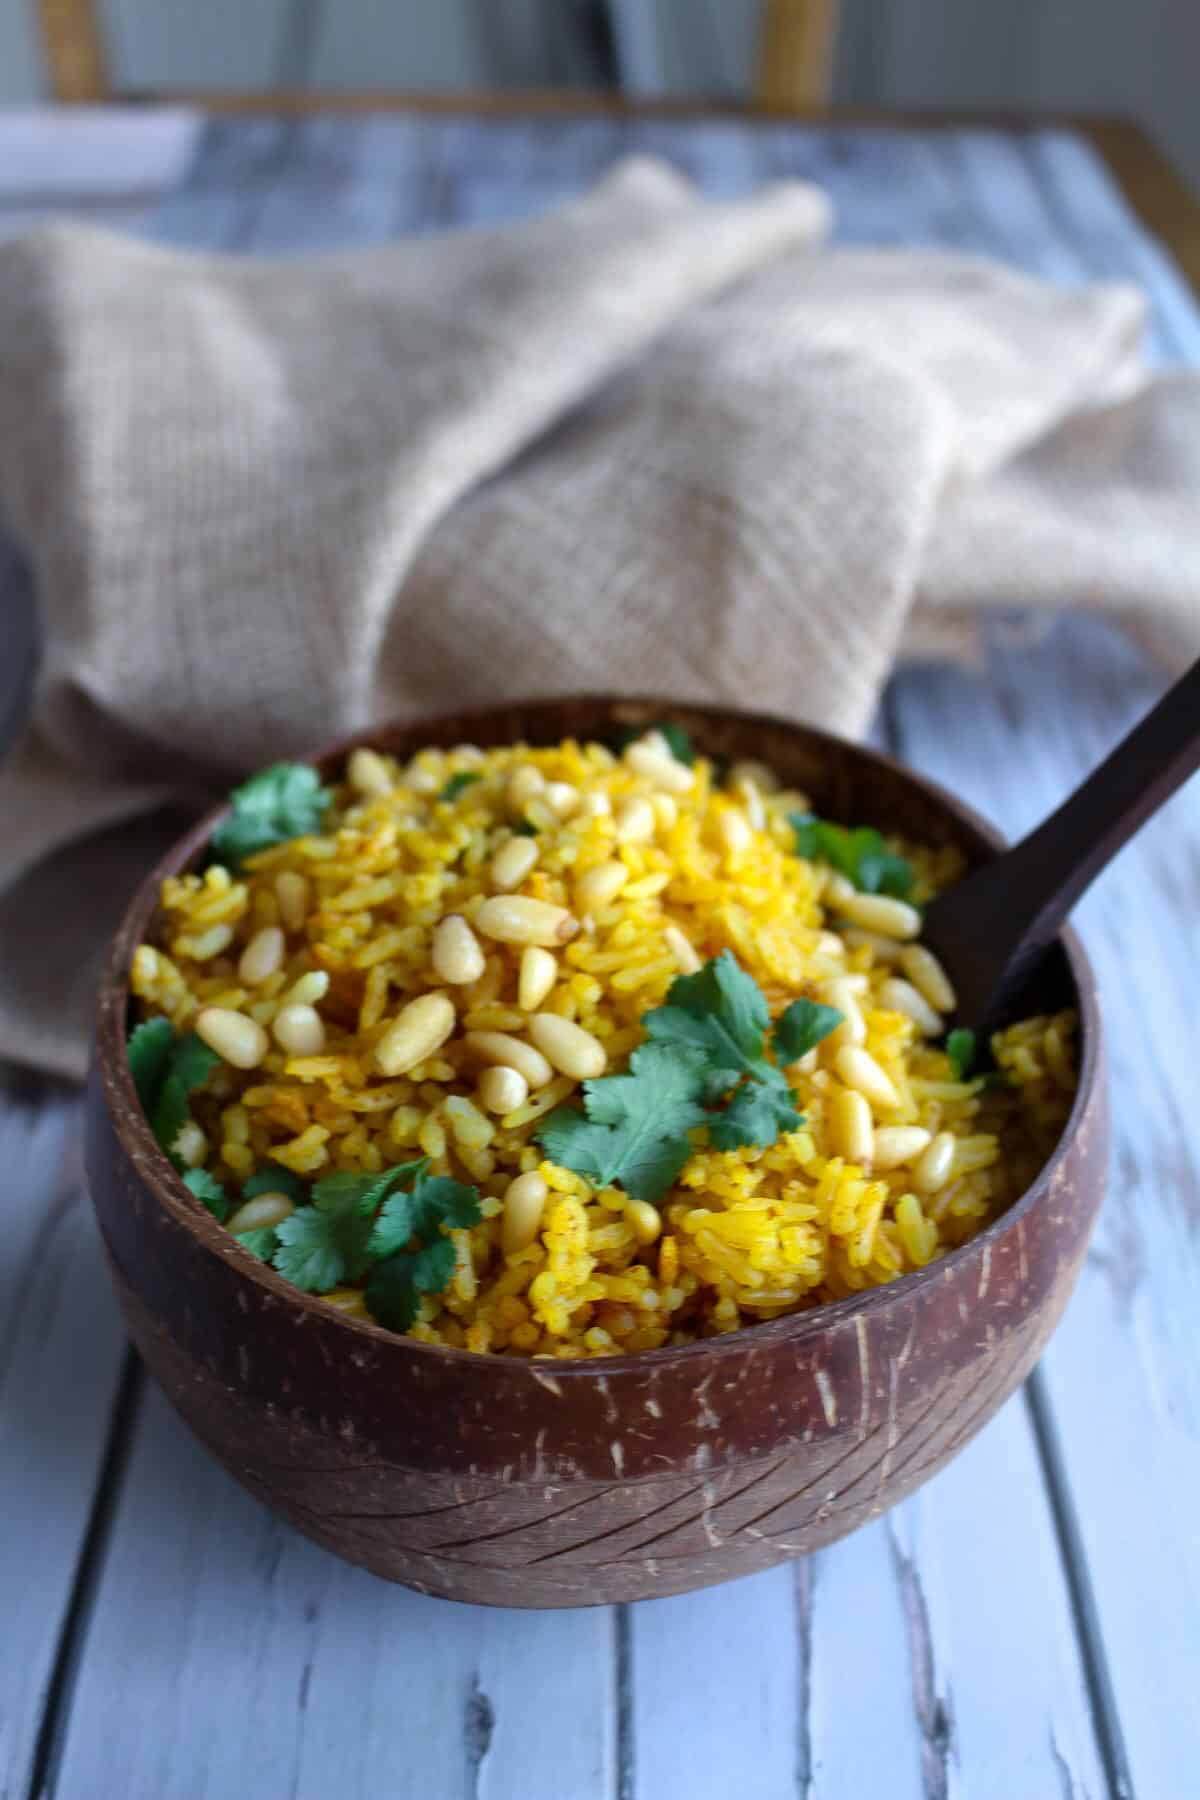 yellow rice in a dark coloured bowl on a blue wooden table